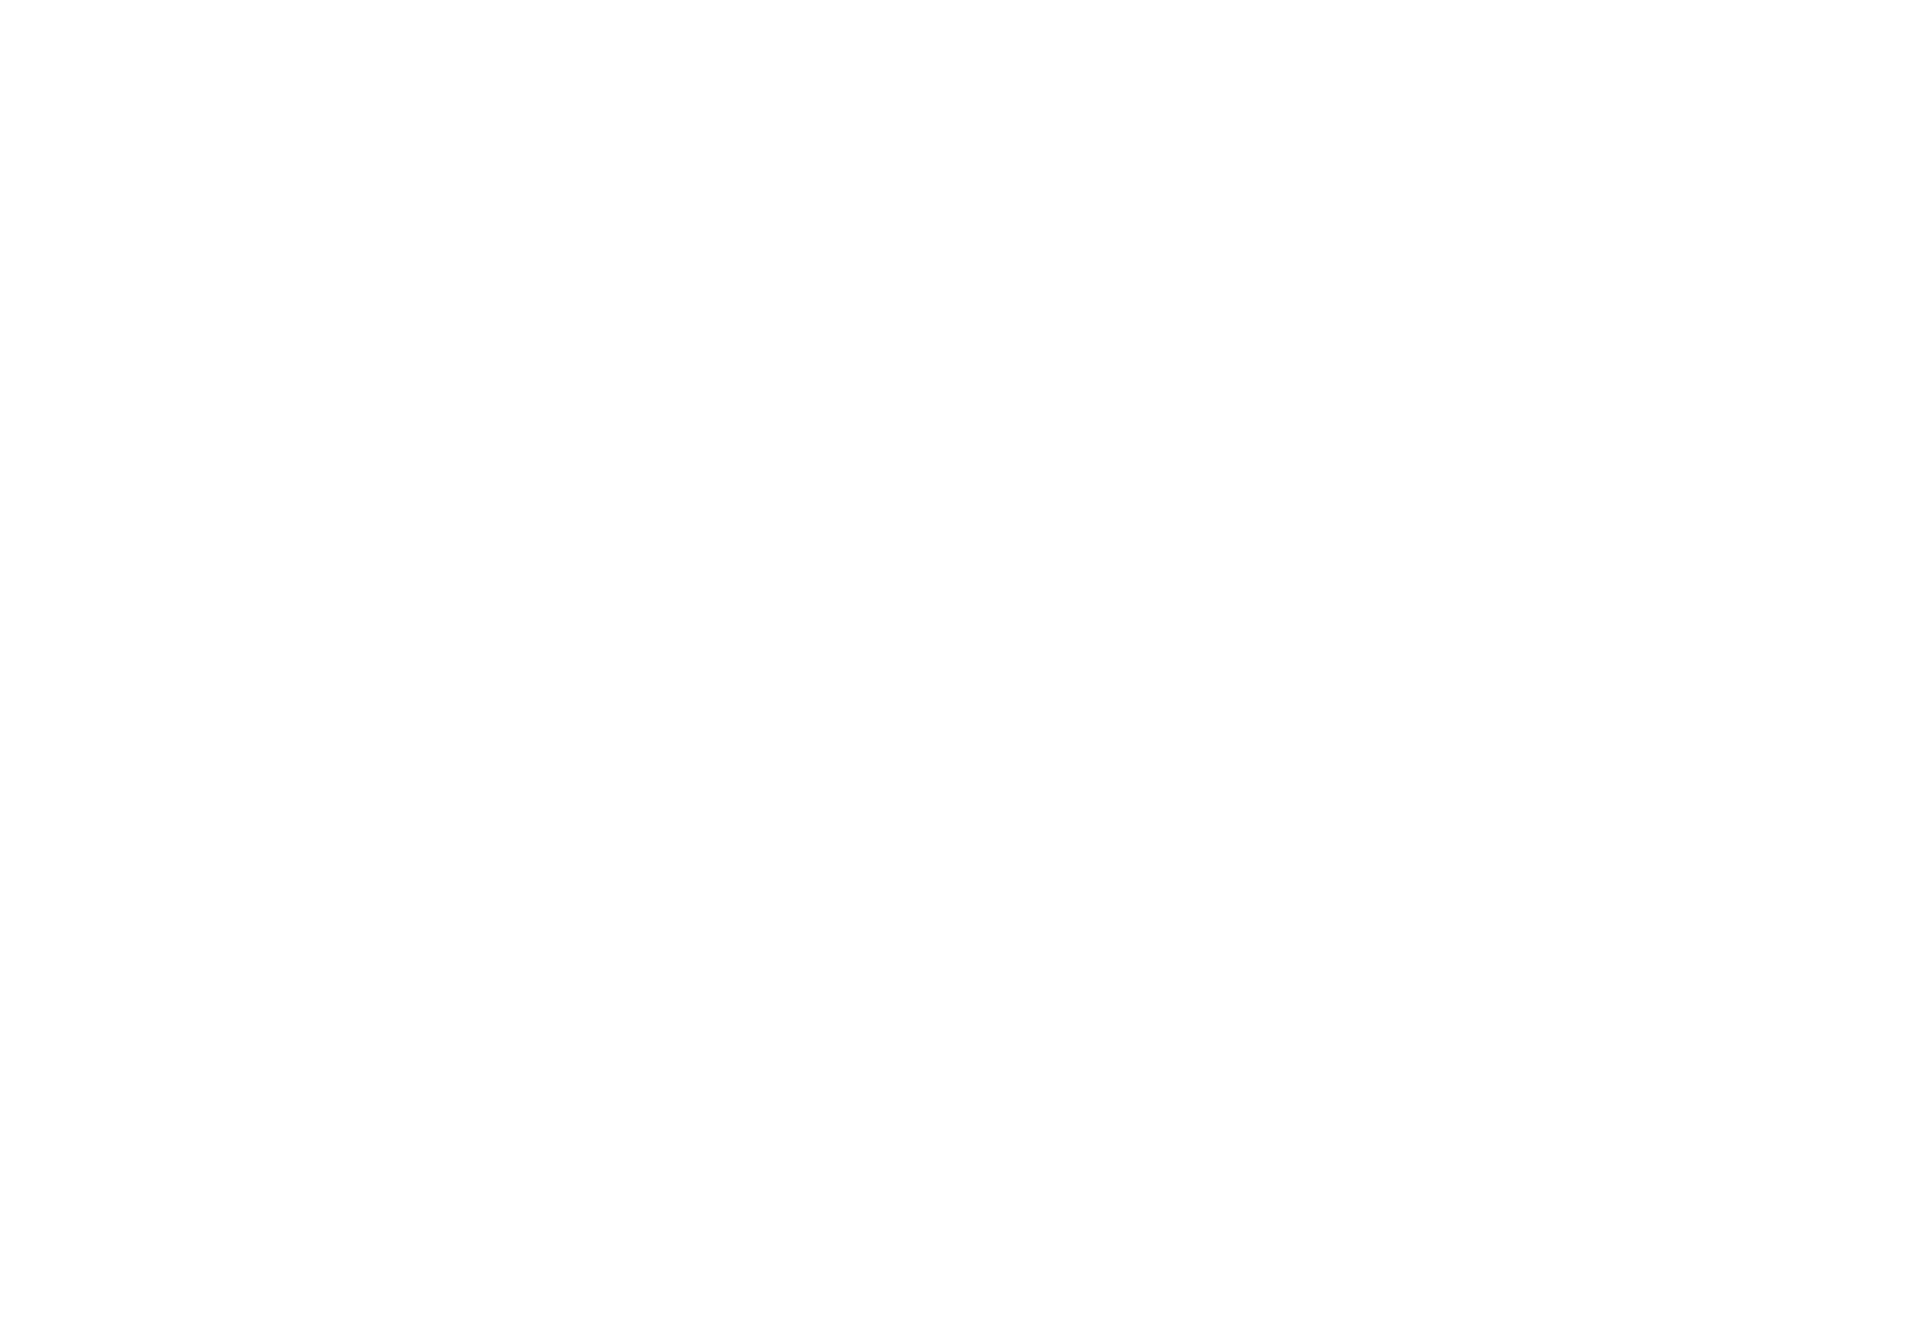 Windward on the river logo - footer, go to homepage